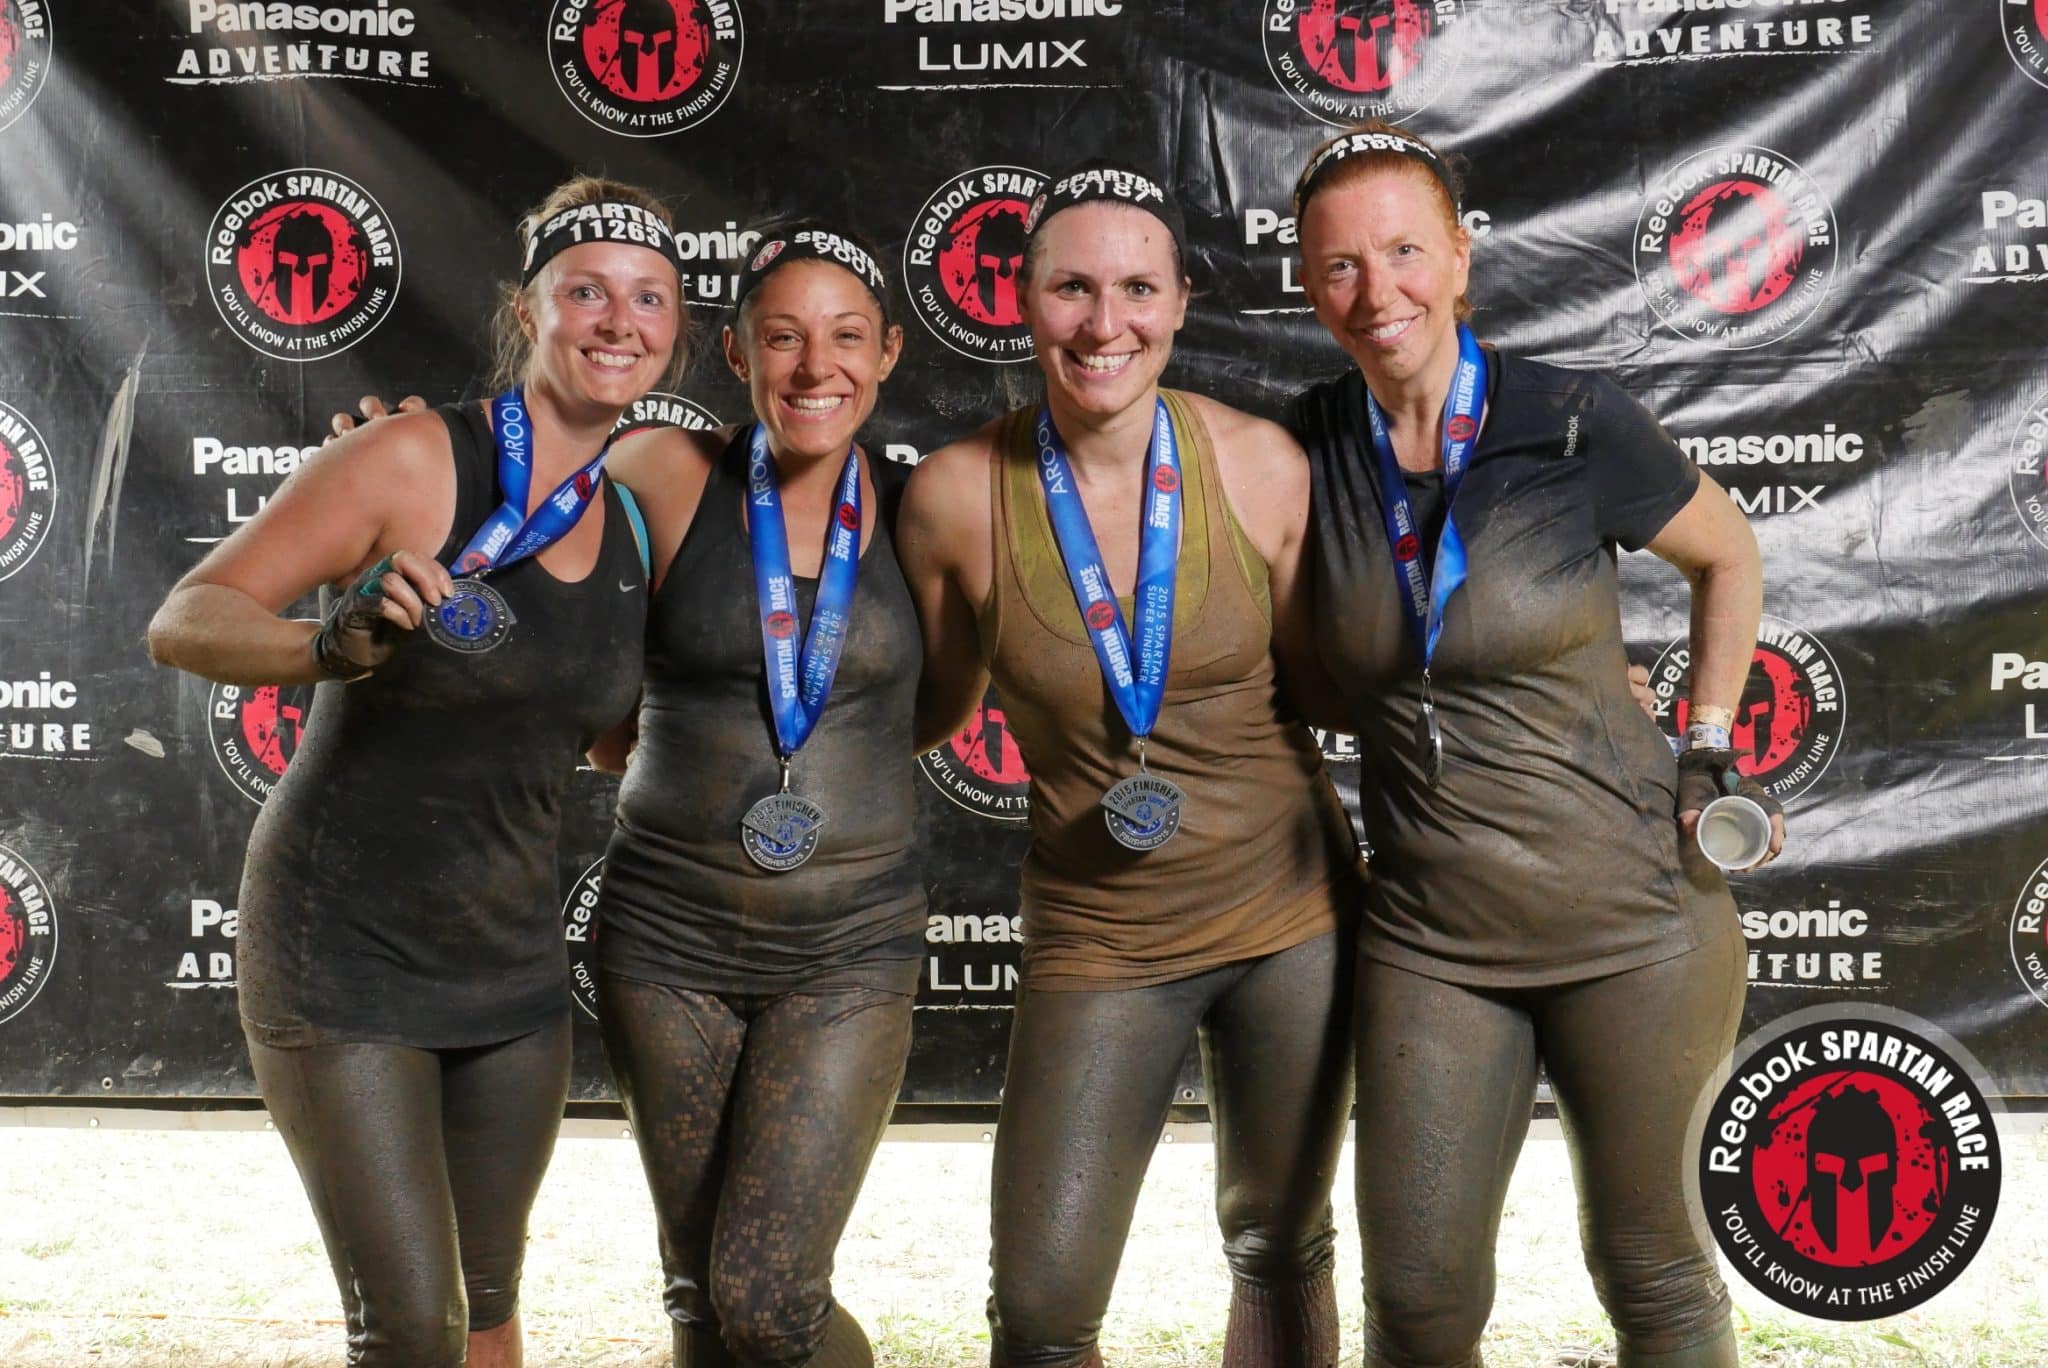 You can learn a lot about yourself when you sign up to run a Spartan Race.